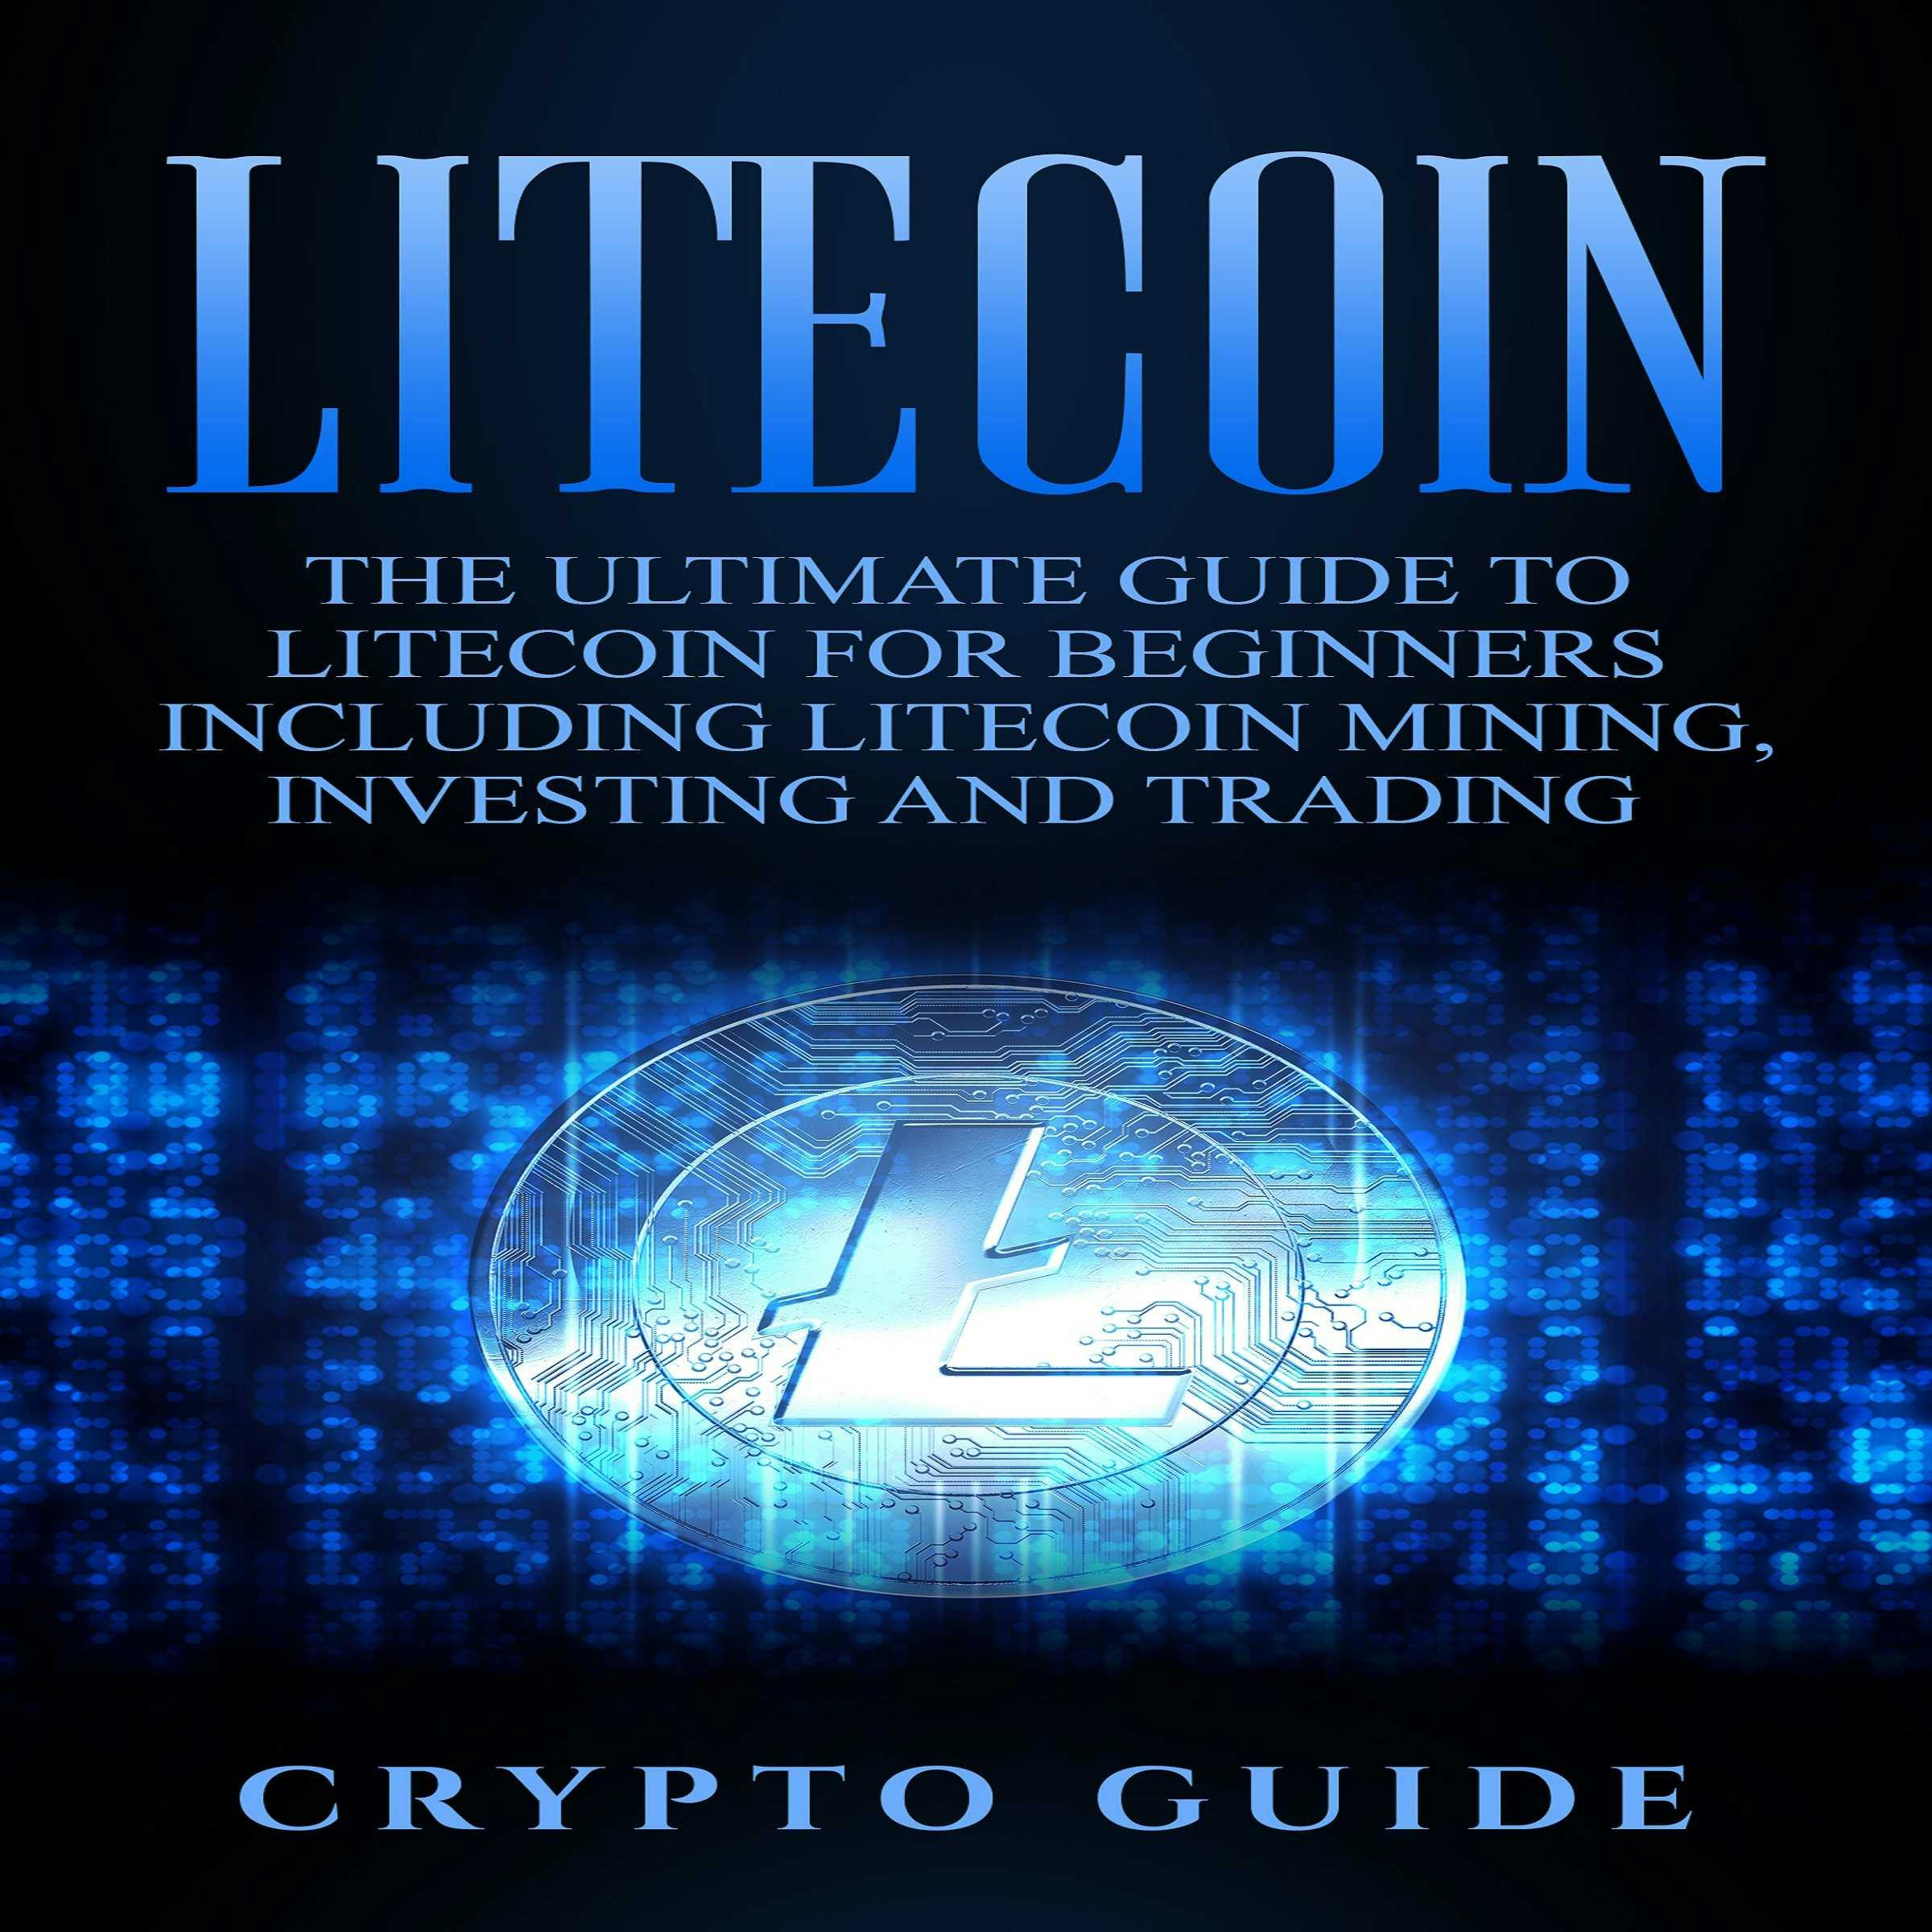 Litecoin: The Ultimate Guide to Litecoin for Beginners Including Litecoin Mining, Investing and Trading - undefined